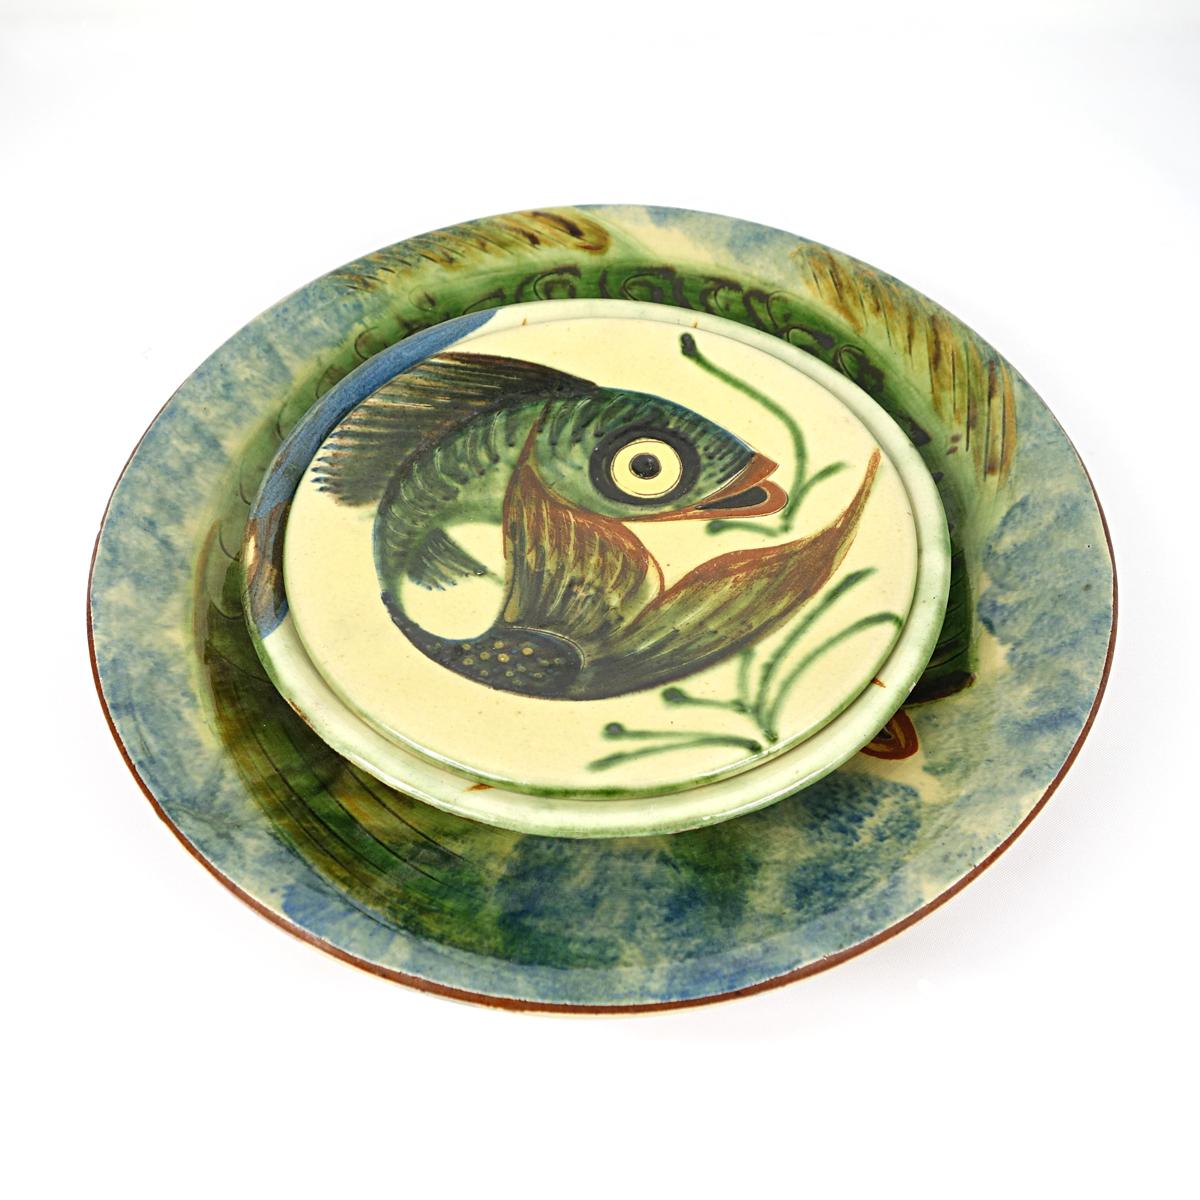 Set of 3 Ceramic Wall Plates with Fish Decor Signed by Spanish Maker Puigdemont In Good Condition For Sale In Doornspijk, NL